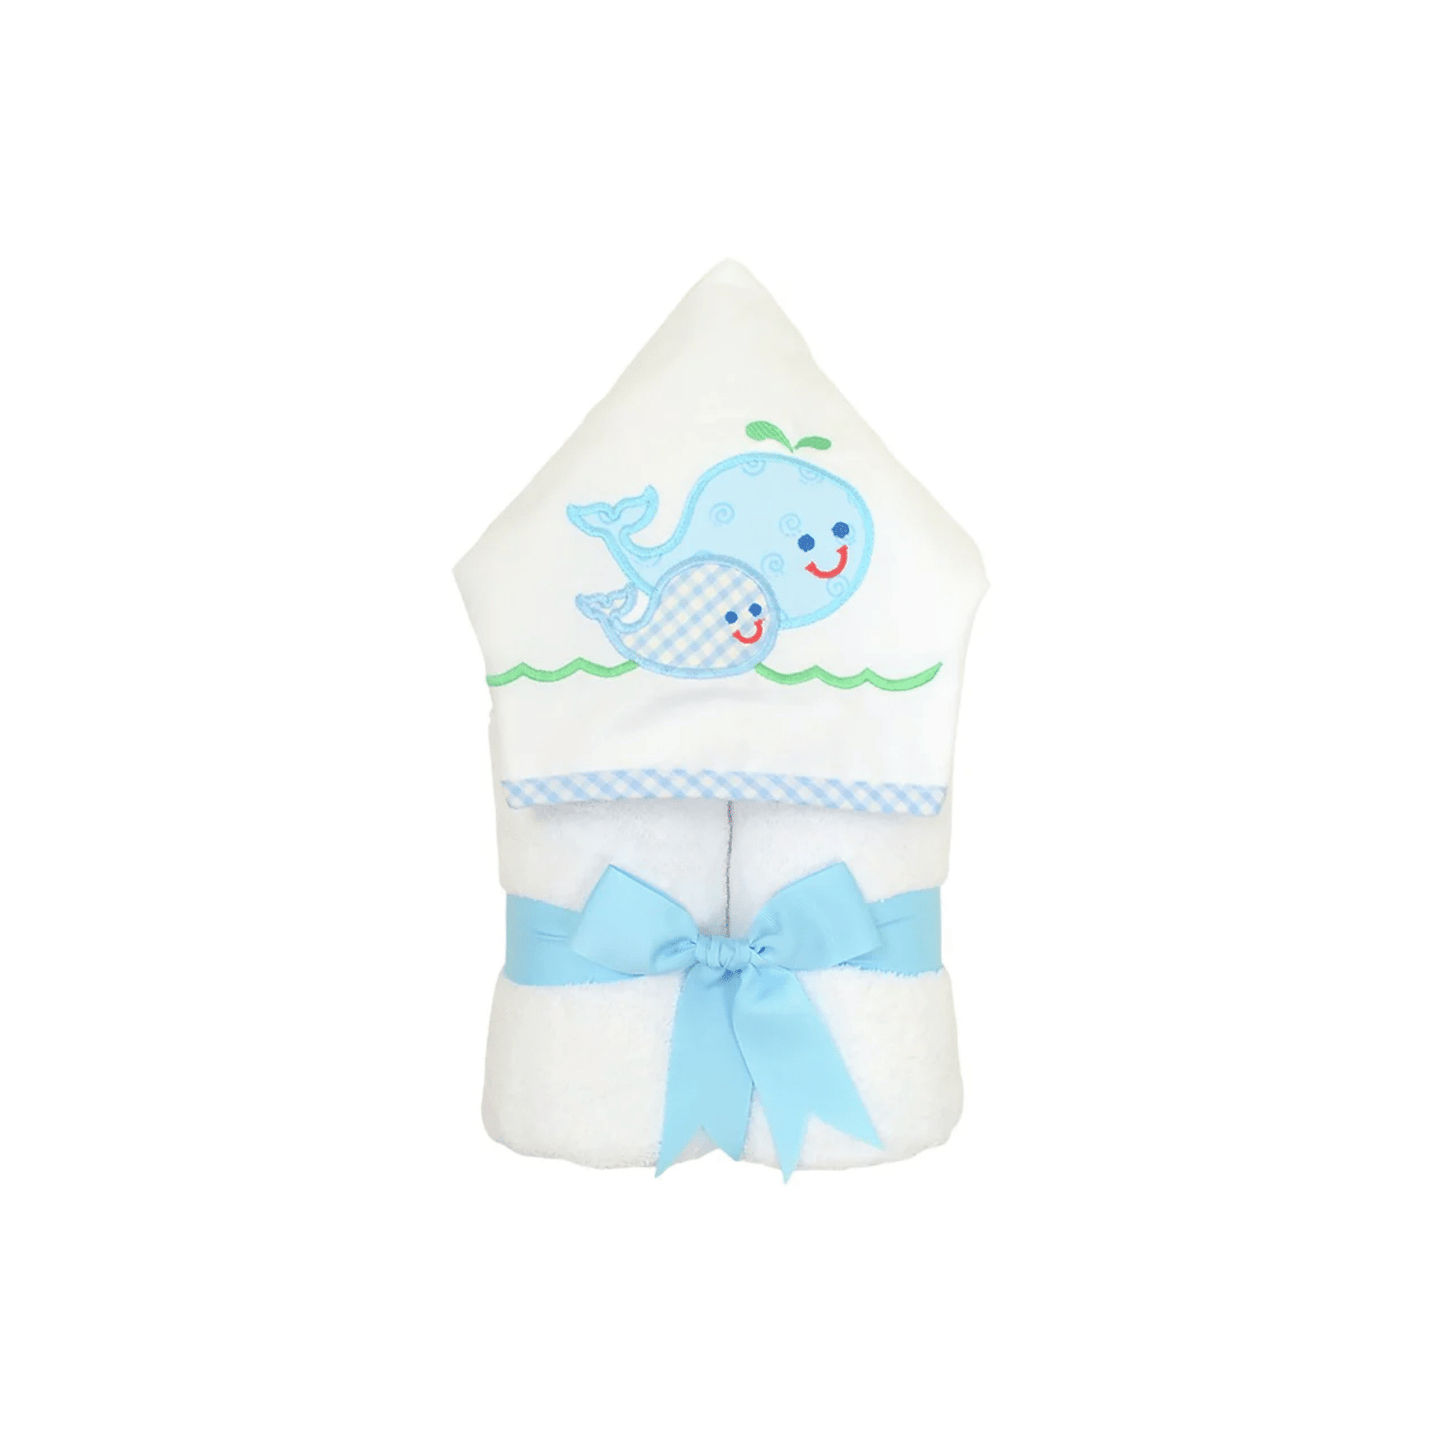 Personalized Baby Boy Blue Whale Hooded Towel - Give Wink